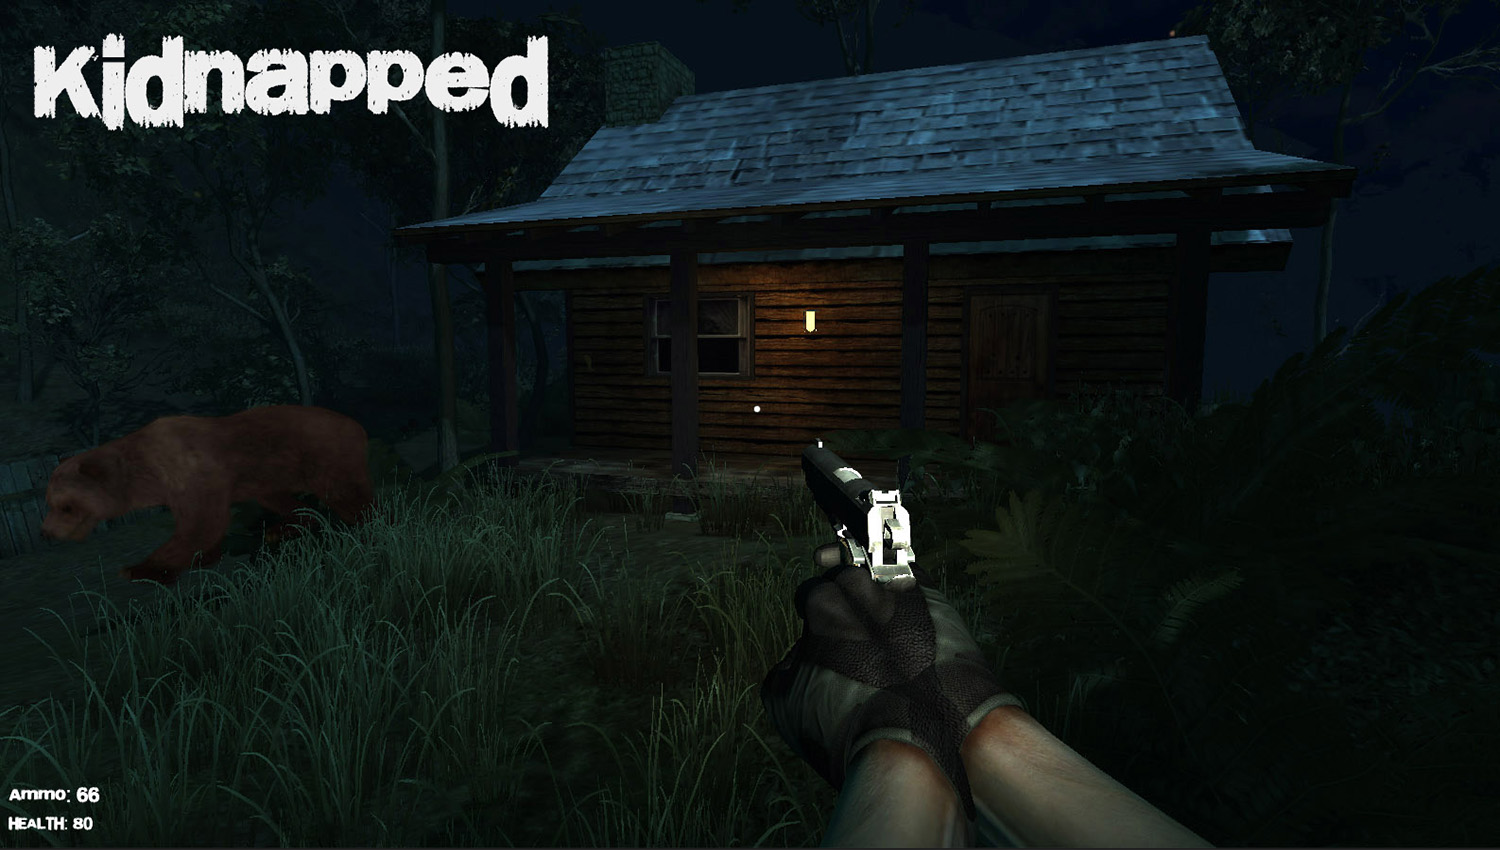 Kidnapped #23